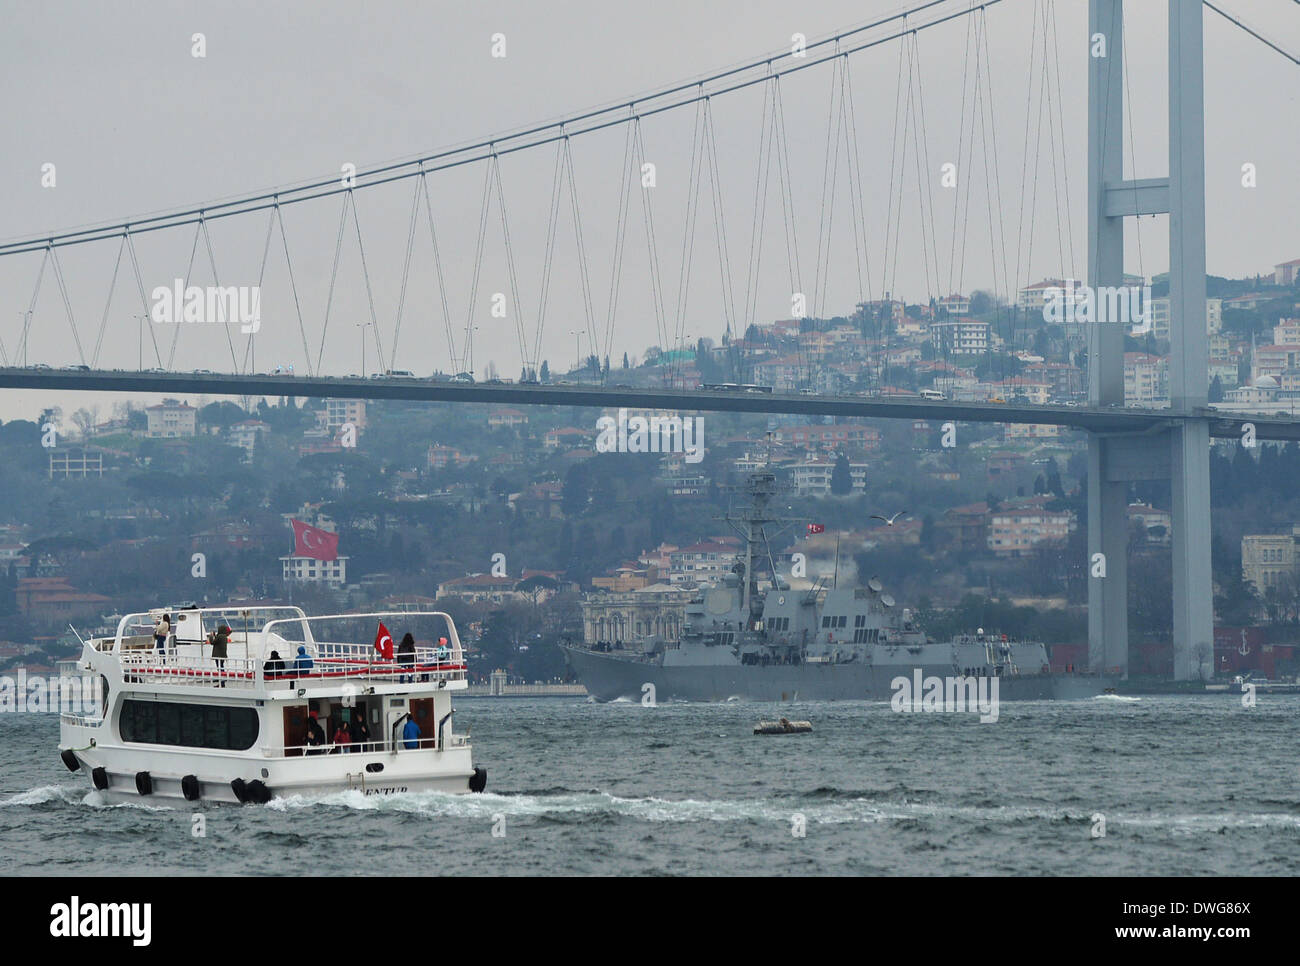 Istanbul, Turkey. 7th Mar, 2014. The U.S. guided-missile destroyer USS Truxtun (back) is seen passing through the Bosphorus strait in Istanbul, Turkey, March 7, 2014. A U.S. guided-missile destroyer USS Truxtun is passing through the Bosphorus strait in Istanbul on Friday afternoon on its way to Black Sea. It will participate in a tactical drill in the northwestern part of the Black Sea on March 11, along with one frigate from Bulgaria and three ships from Romania. Credit:  Lu Zhe/Xinhua/Alamy Live News Stock Photo